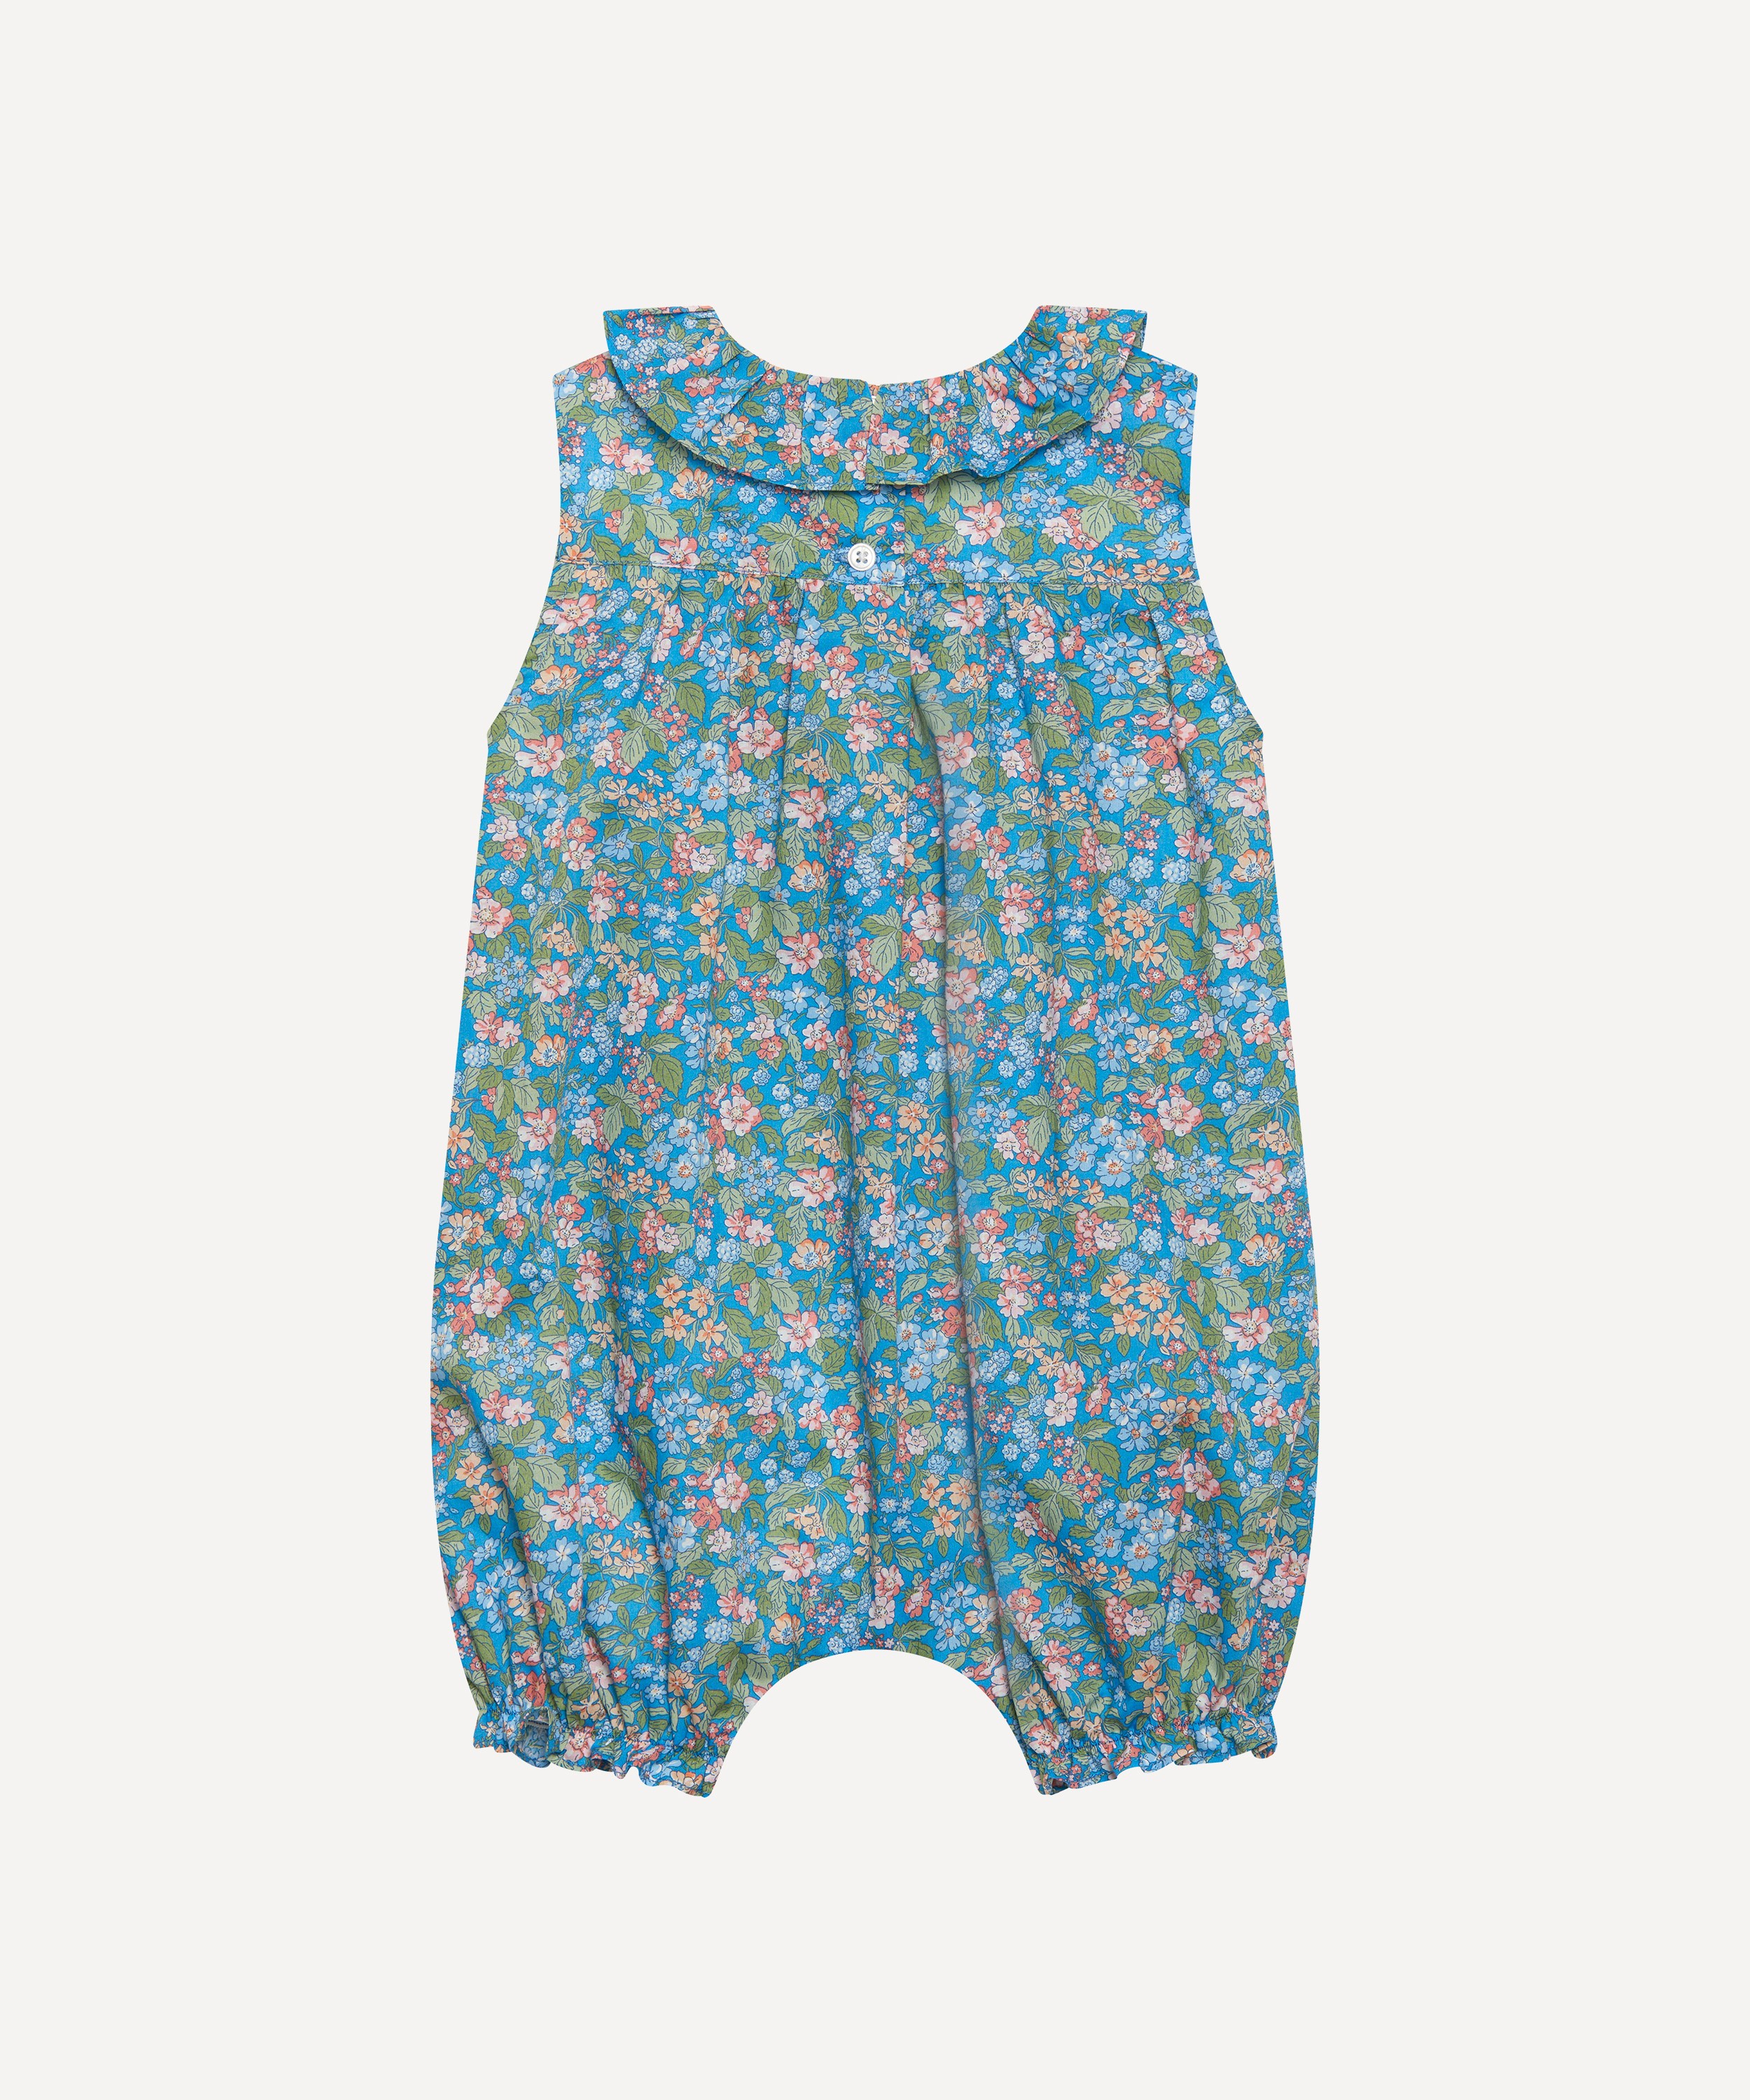 Trotters - Hedgerow Ramble Willow Romper 3-24 Months image number 1